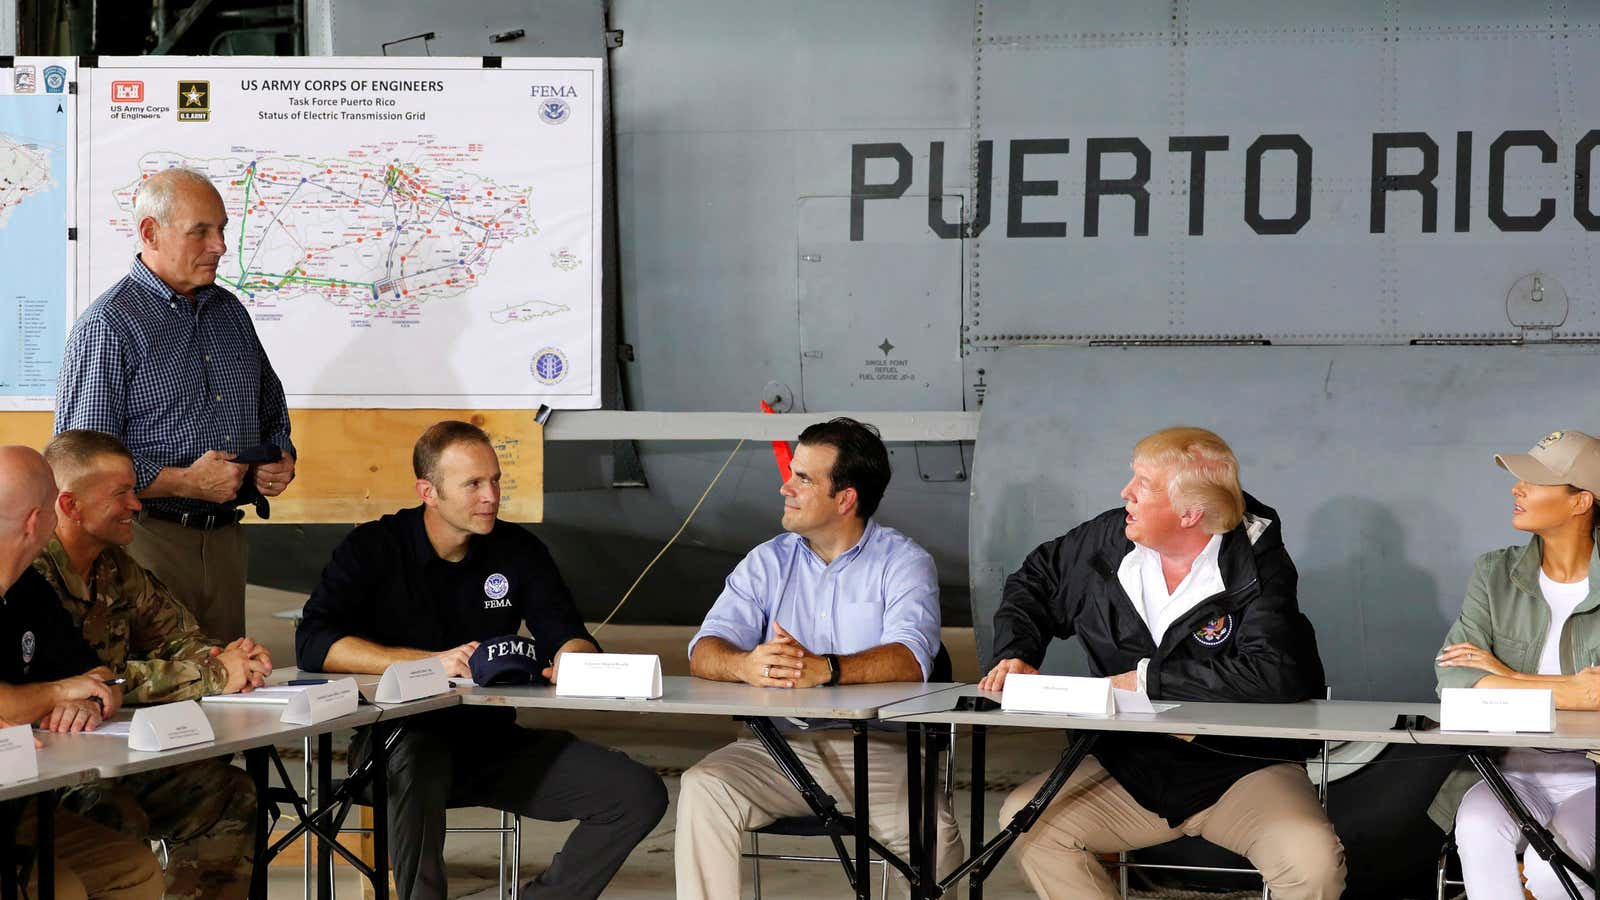 Nearly two weeks after Maria obliterated Puerto Rico, president Trump left Washington for the island.